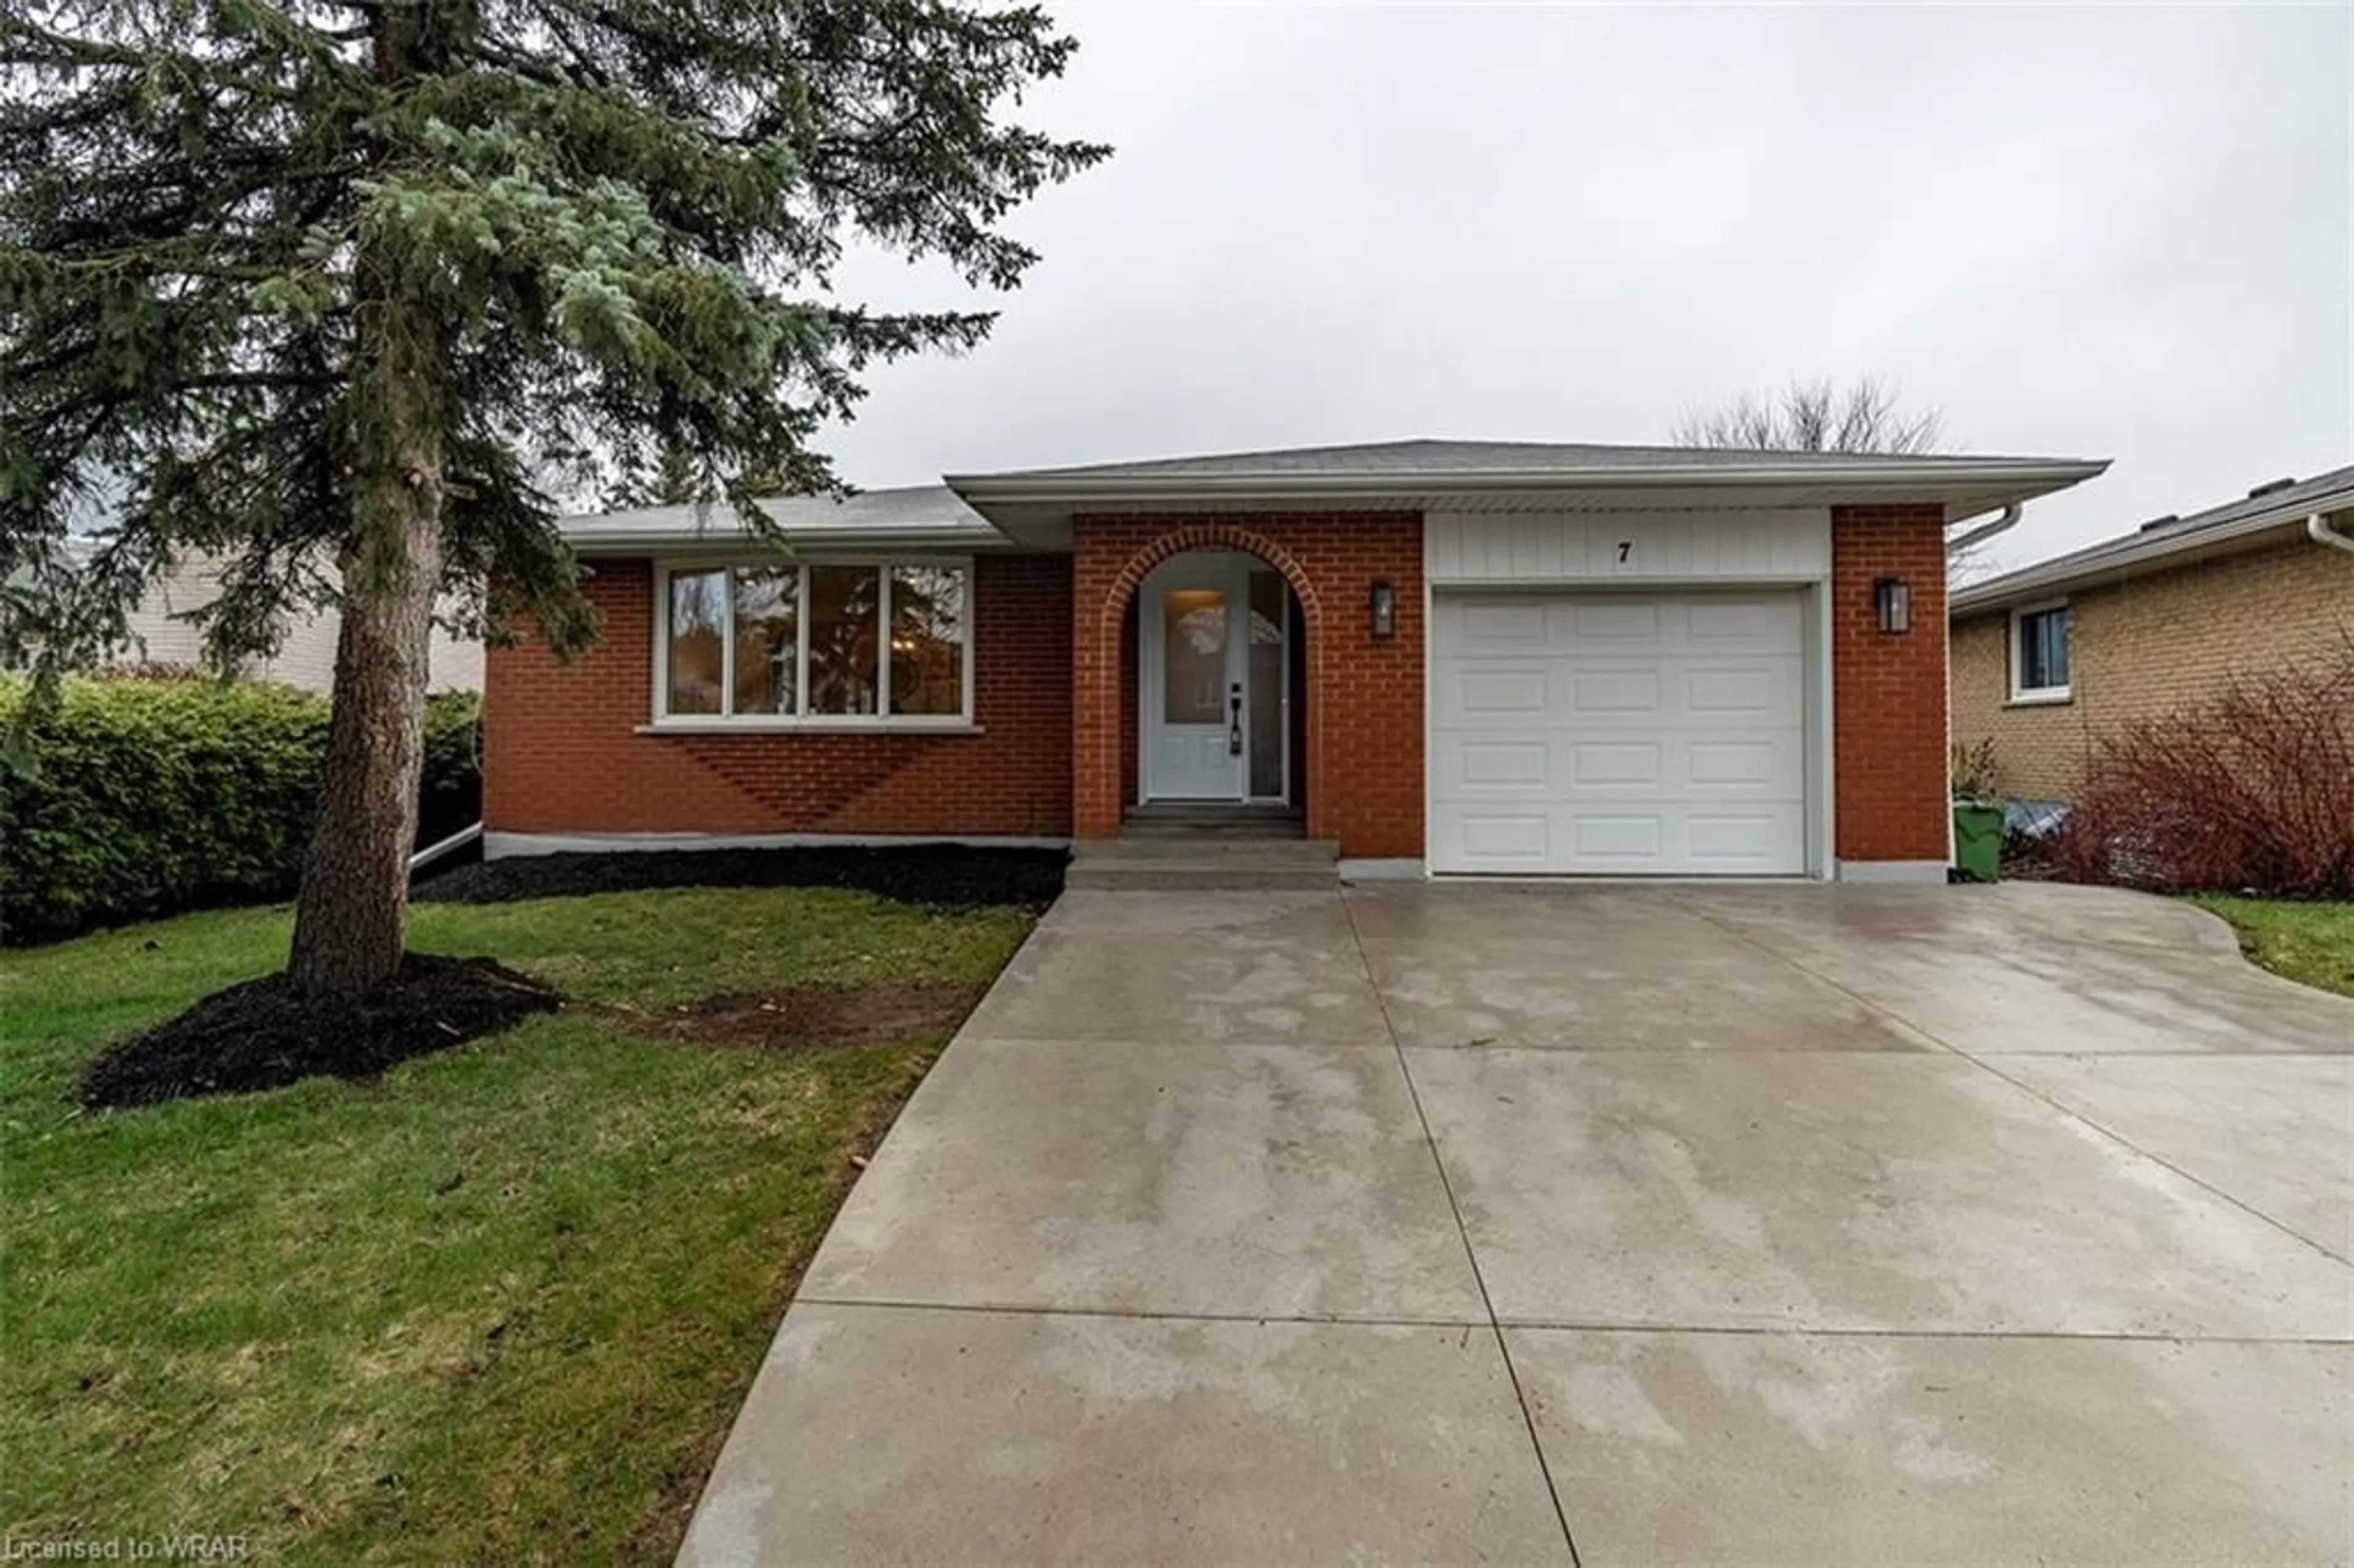 Home with brick exterior material for 7 Wordsworth Pl, Kitchener Ontario N2B 3K6